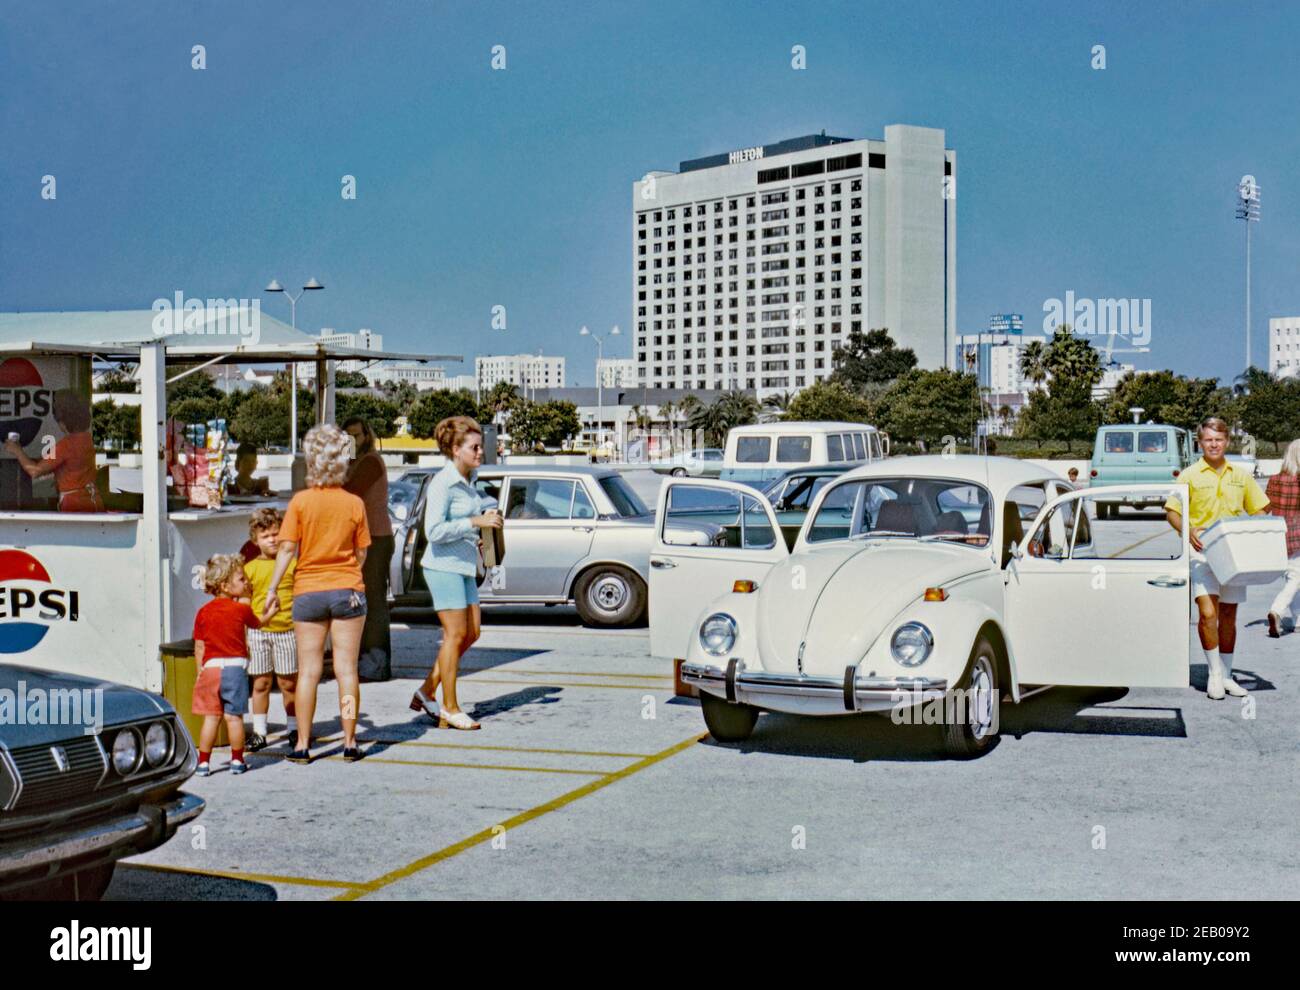 A sunny parking lot in downtown St Petersburg, Florida, USA 1972. A hot day means that it’s shorts weather and good business for the Pepsi Cola kiosk. Opening the car doors of a VW Beetle also helps the interior keep cool. A man carries a polystyrene, insulated cool-box, portable cooler or icebox. At the rear is the Hilton Bayfront hotel. Stock Photo